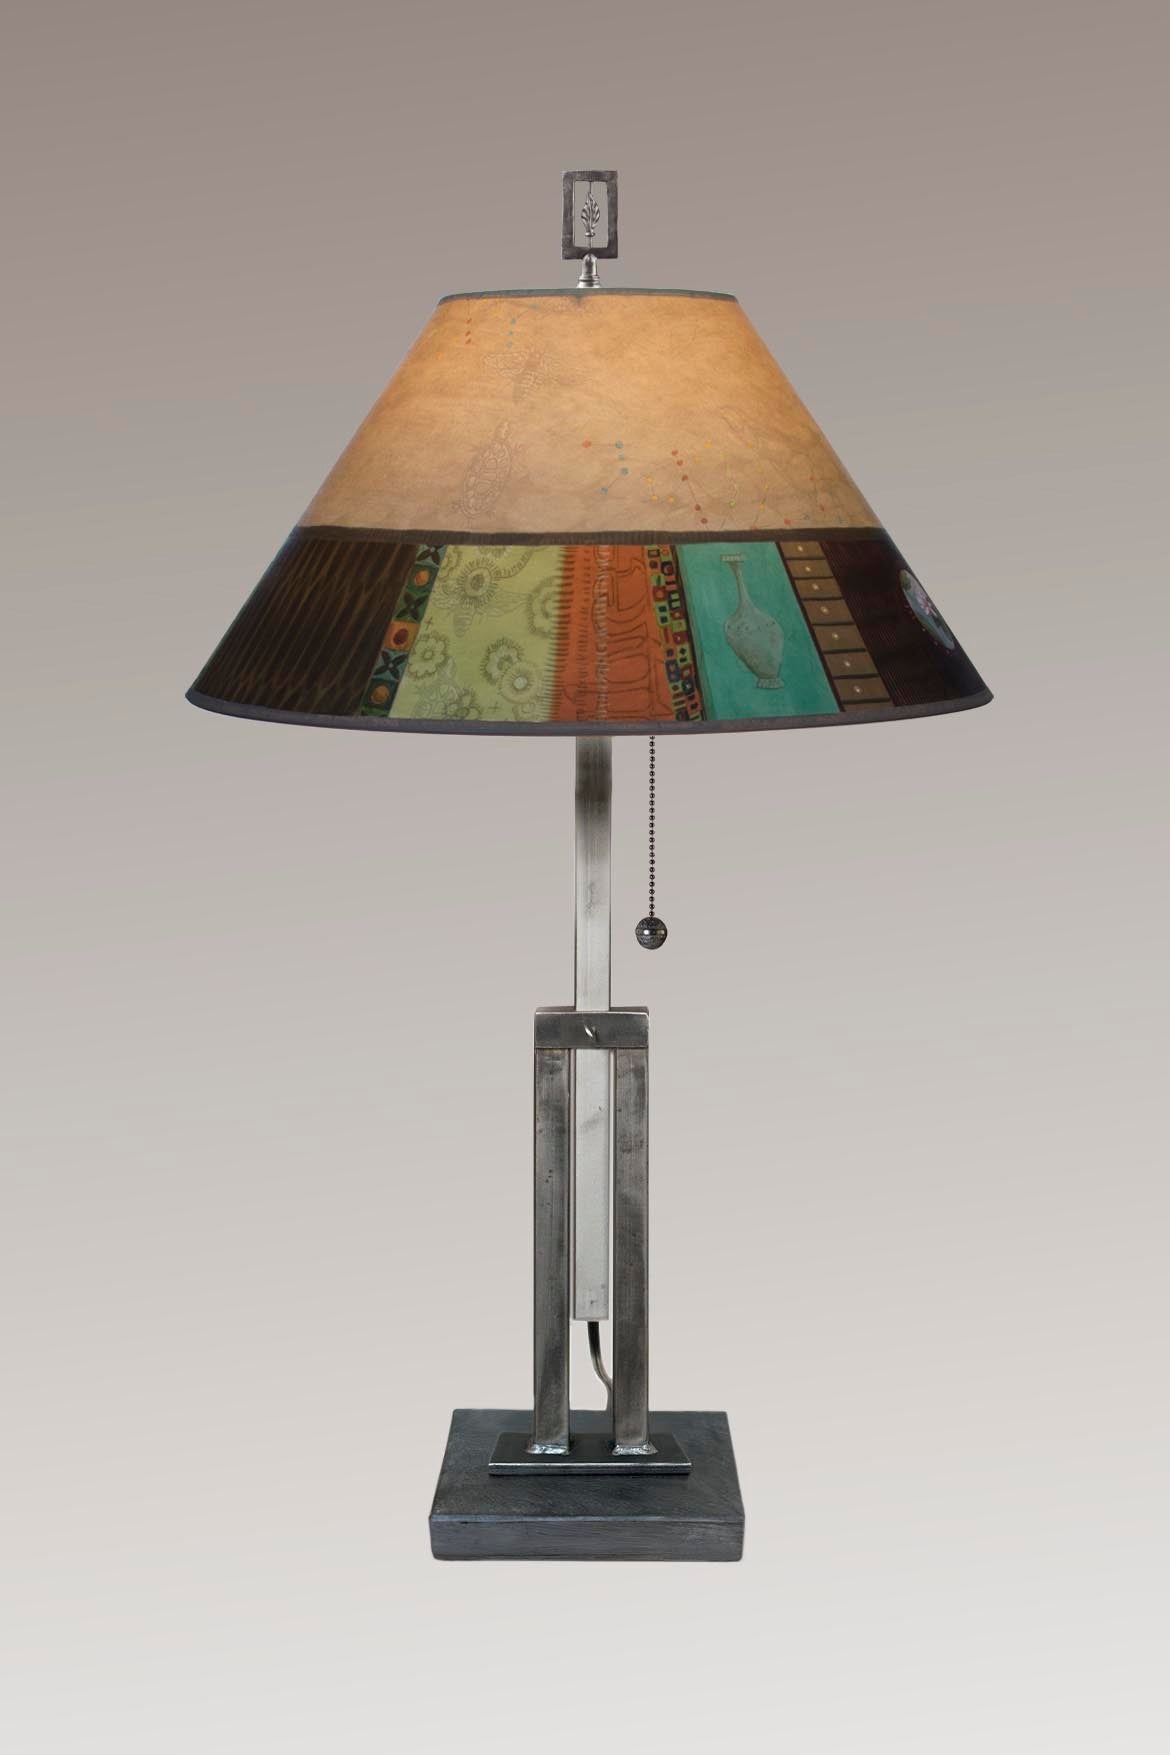 Adjustable-Height Steel Table Lamp with Large Drum Shade in Linen Match